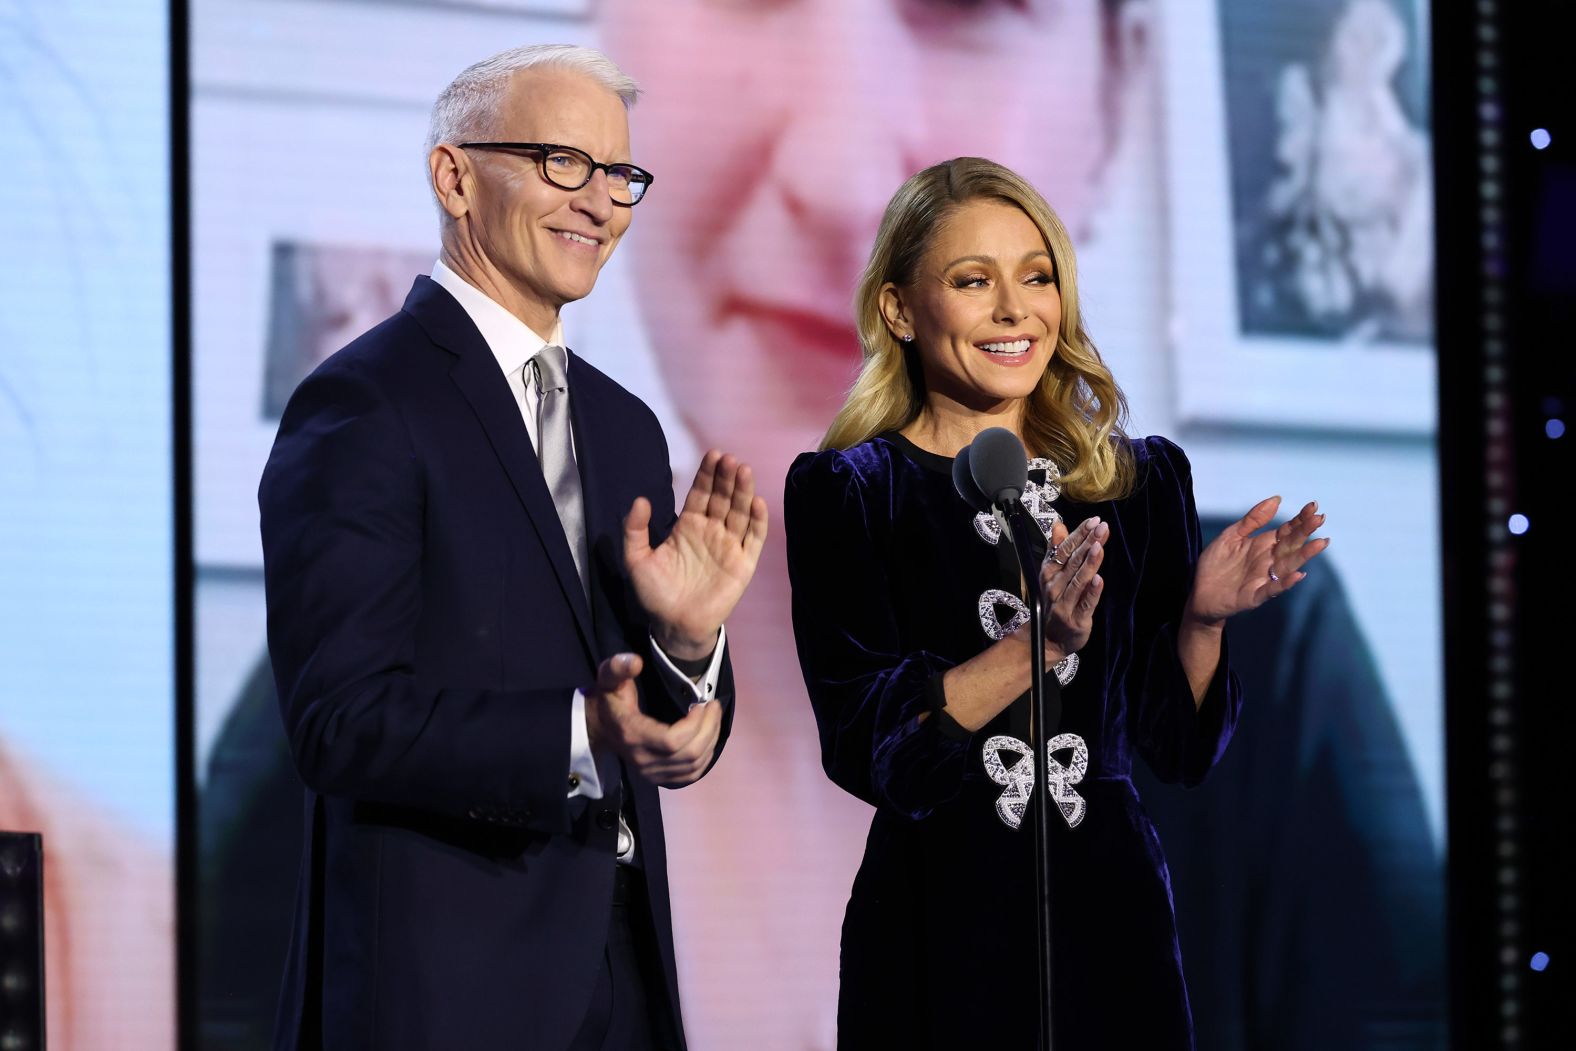 Anderson Cooper and Kelly Ripa host the show.